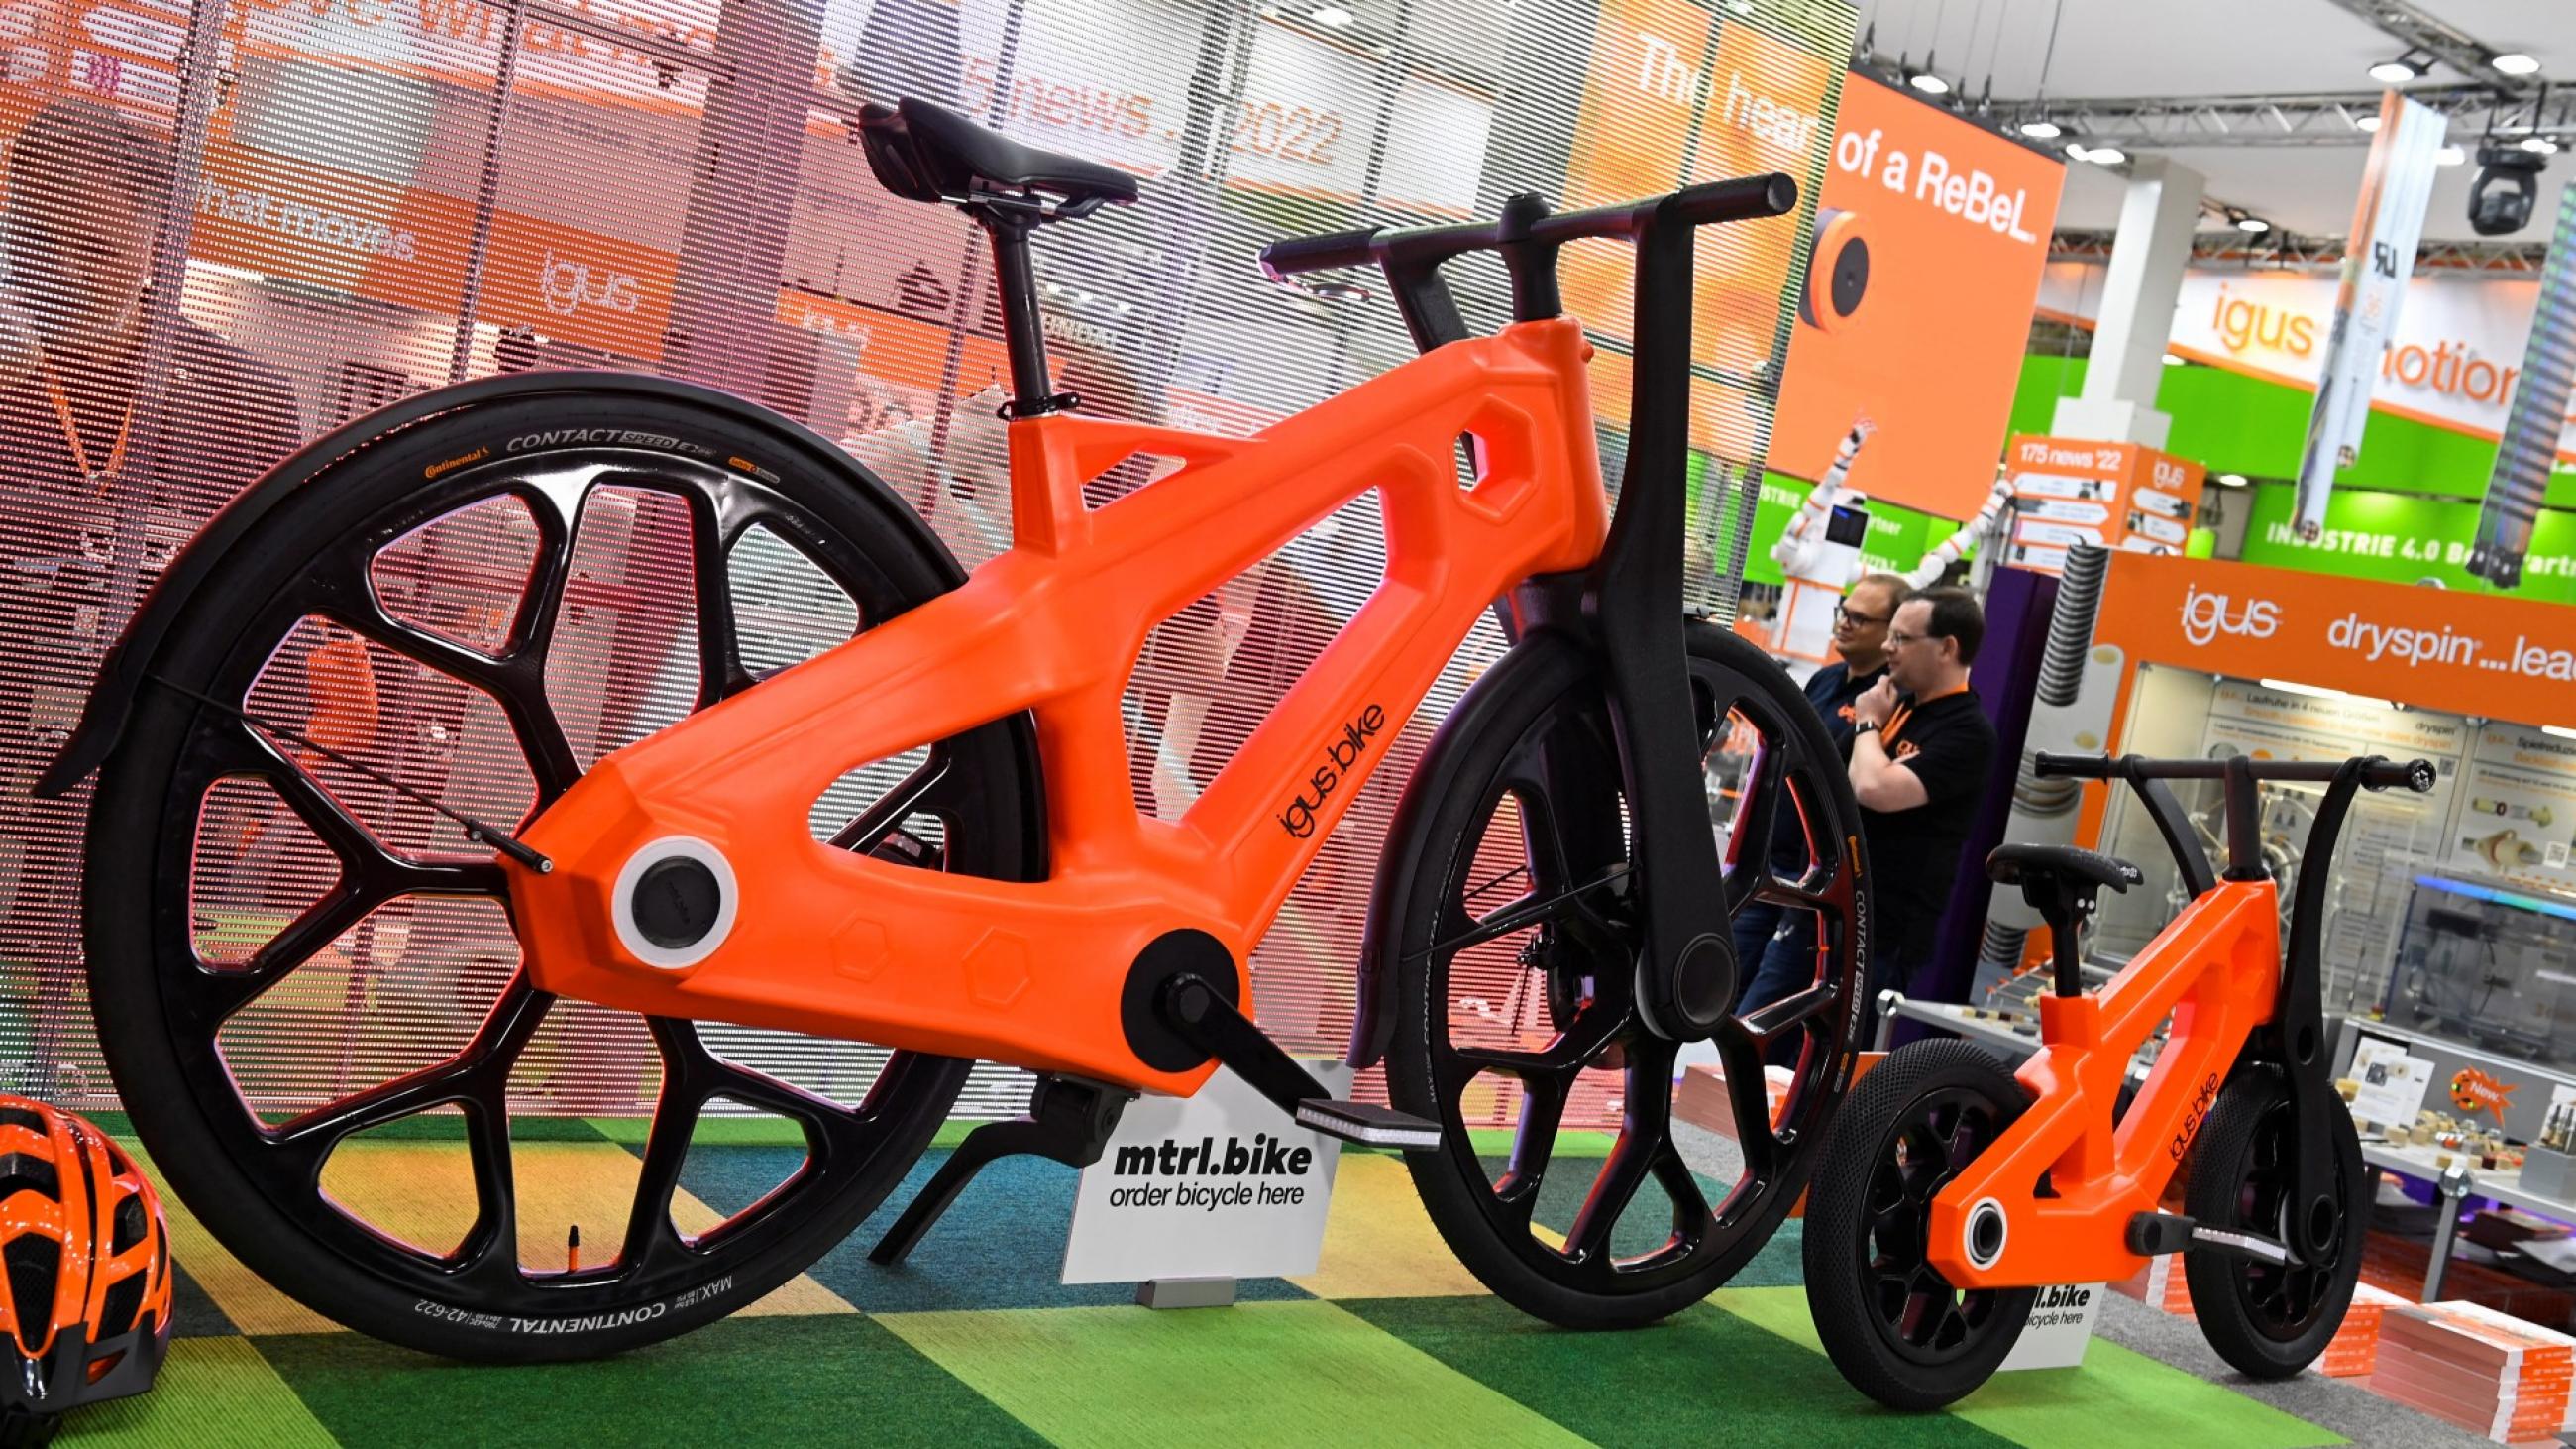 Two bright orange bicycles with black wheels are photographed on astroturf at an exhibition in Hanover, Germany